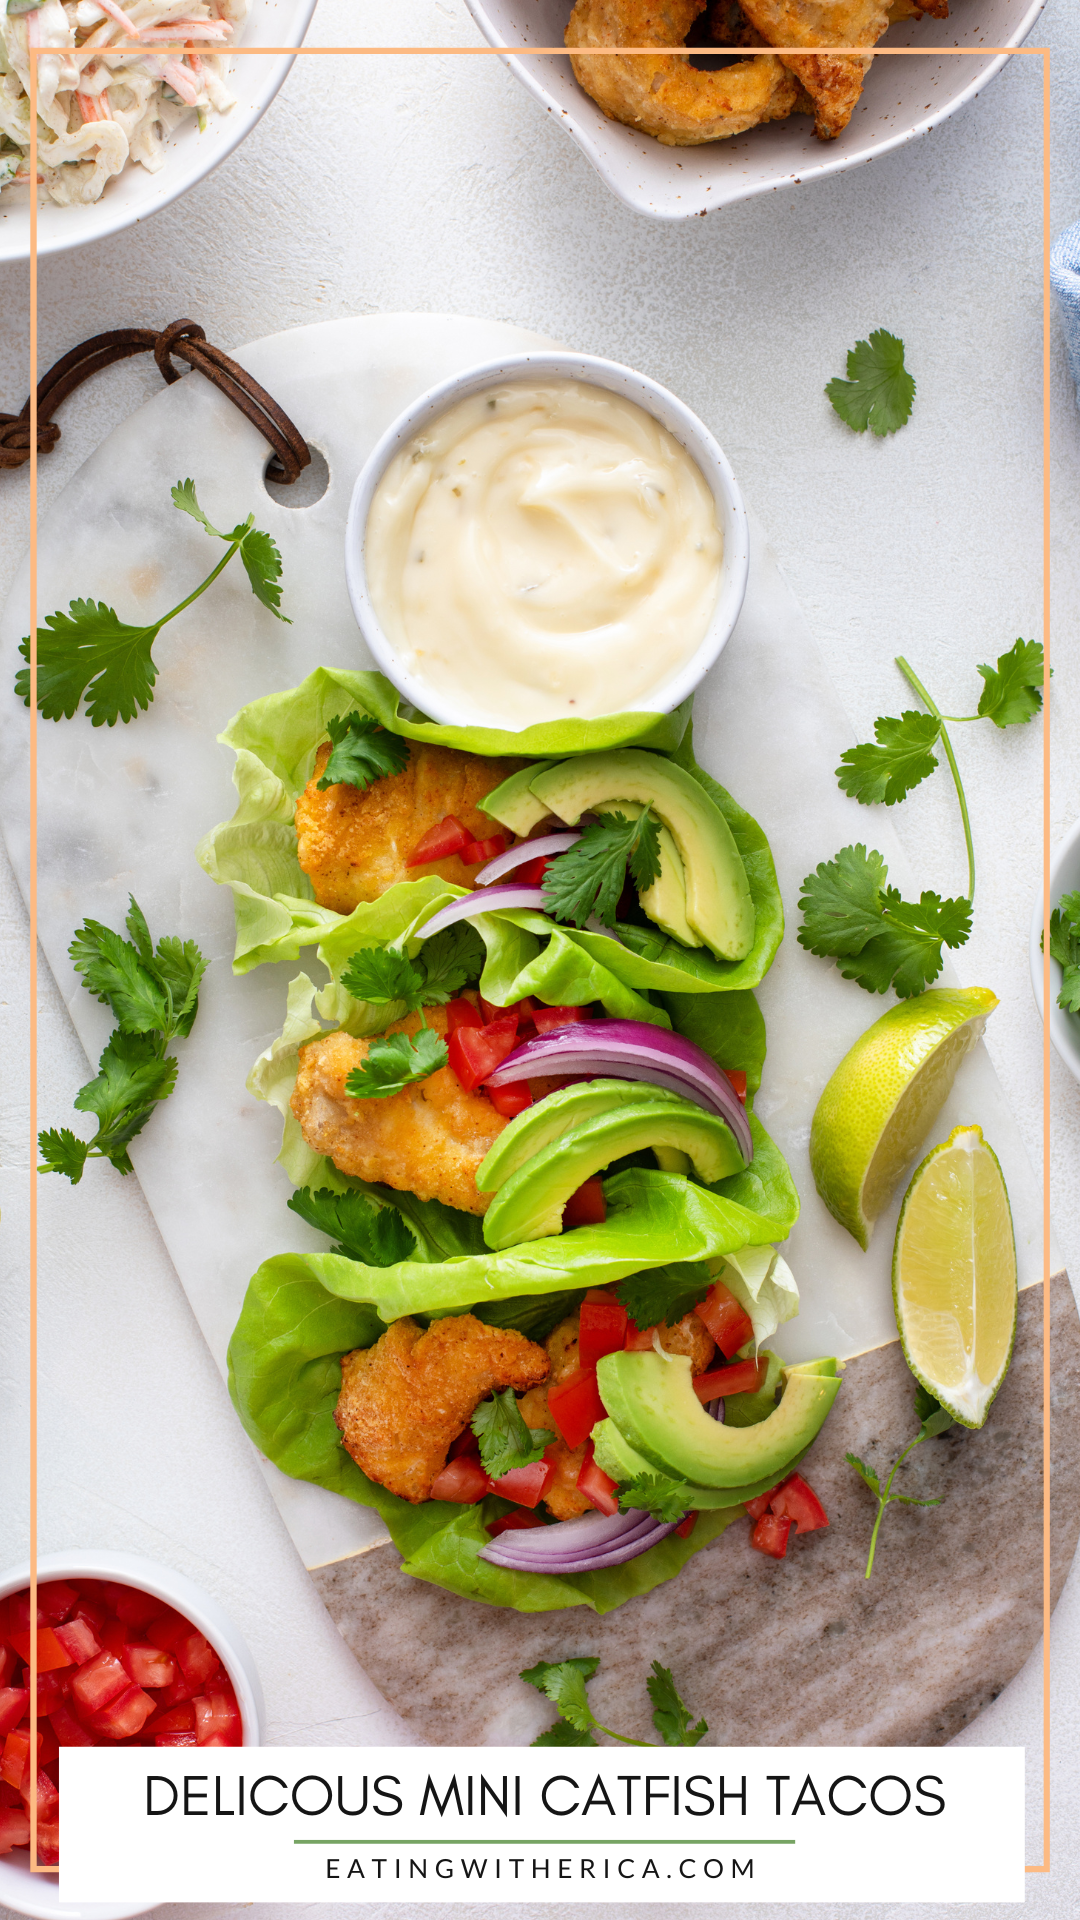 Looking for the perfect festive yet simple bite sized appetizer that everyone will love? Try these Mini Catfish Tacos! CLICK HERE for the recipe!